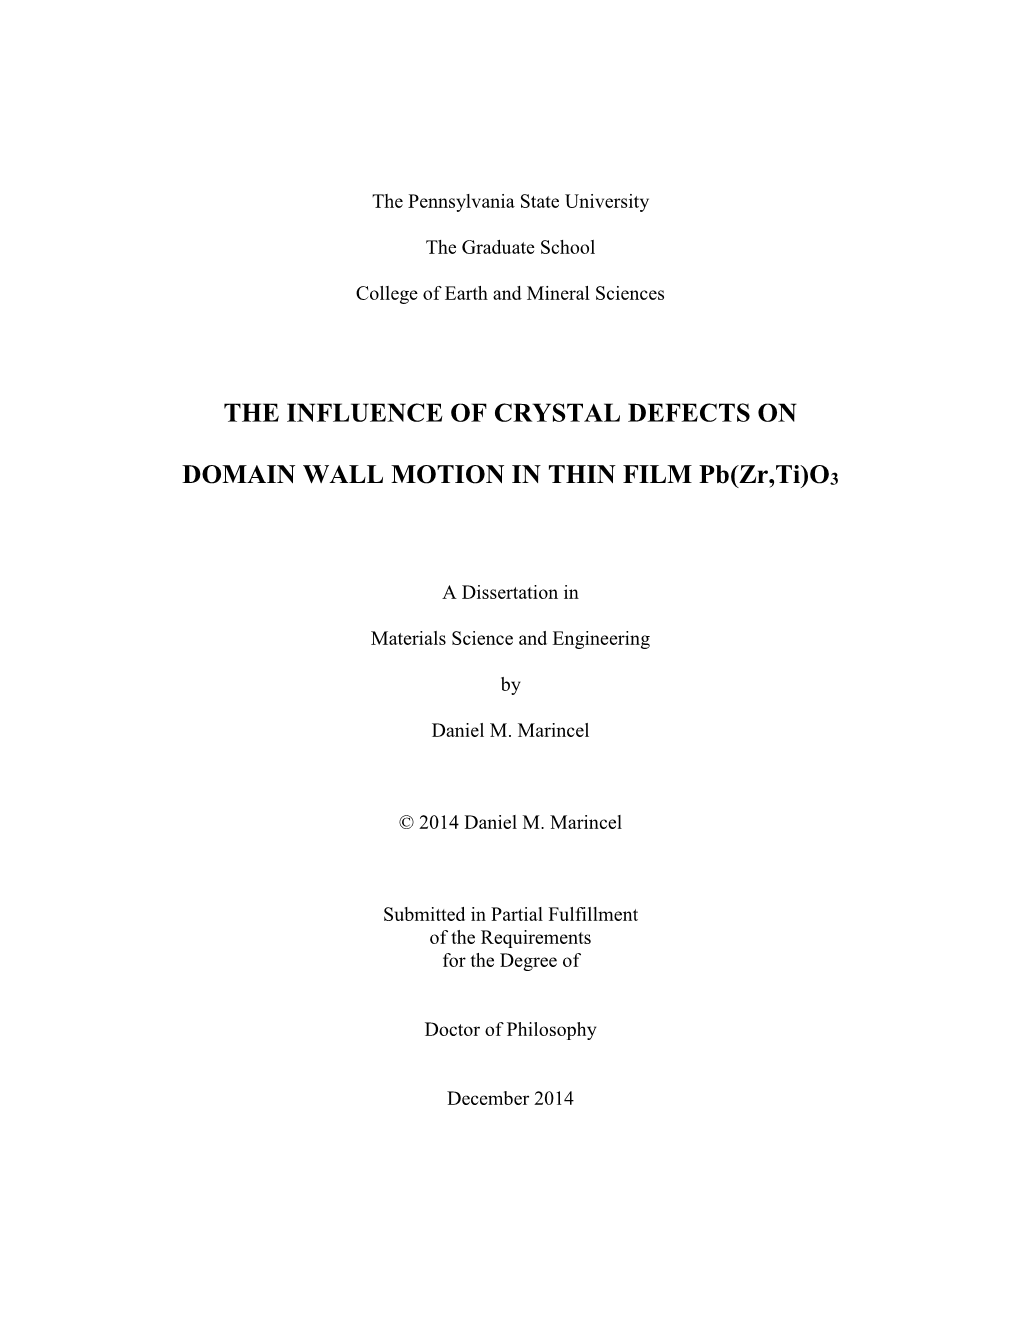 The Influence of Crystal Defects on Domain Wall Motion in Thin Film Pb